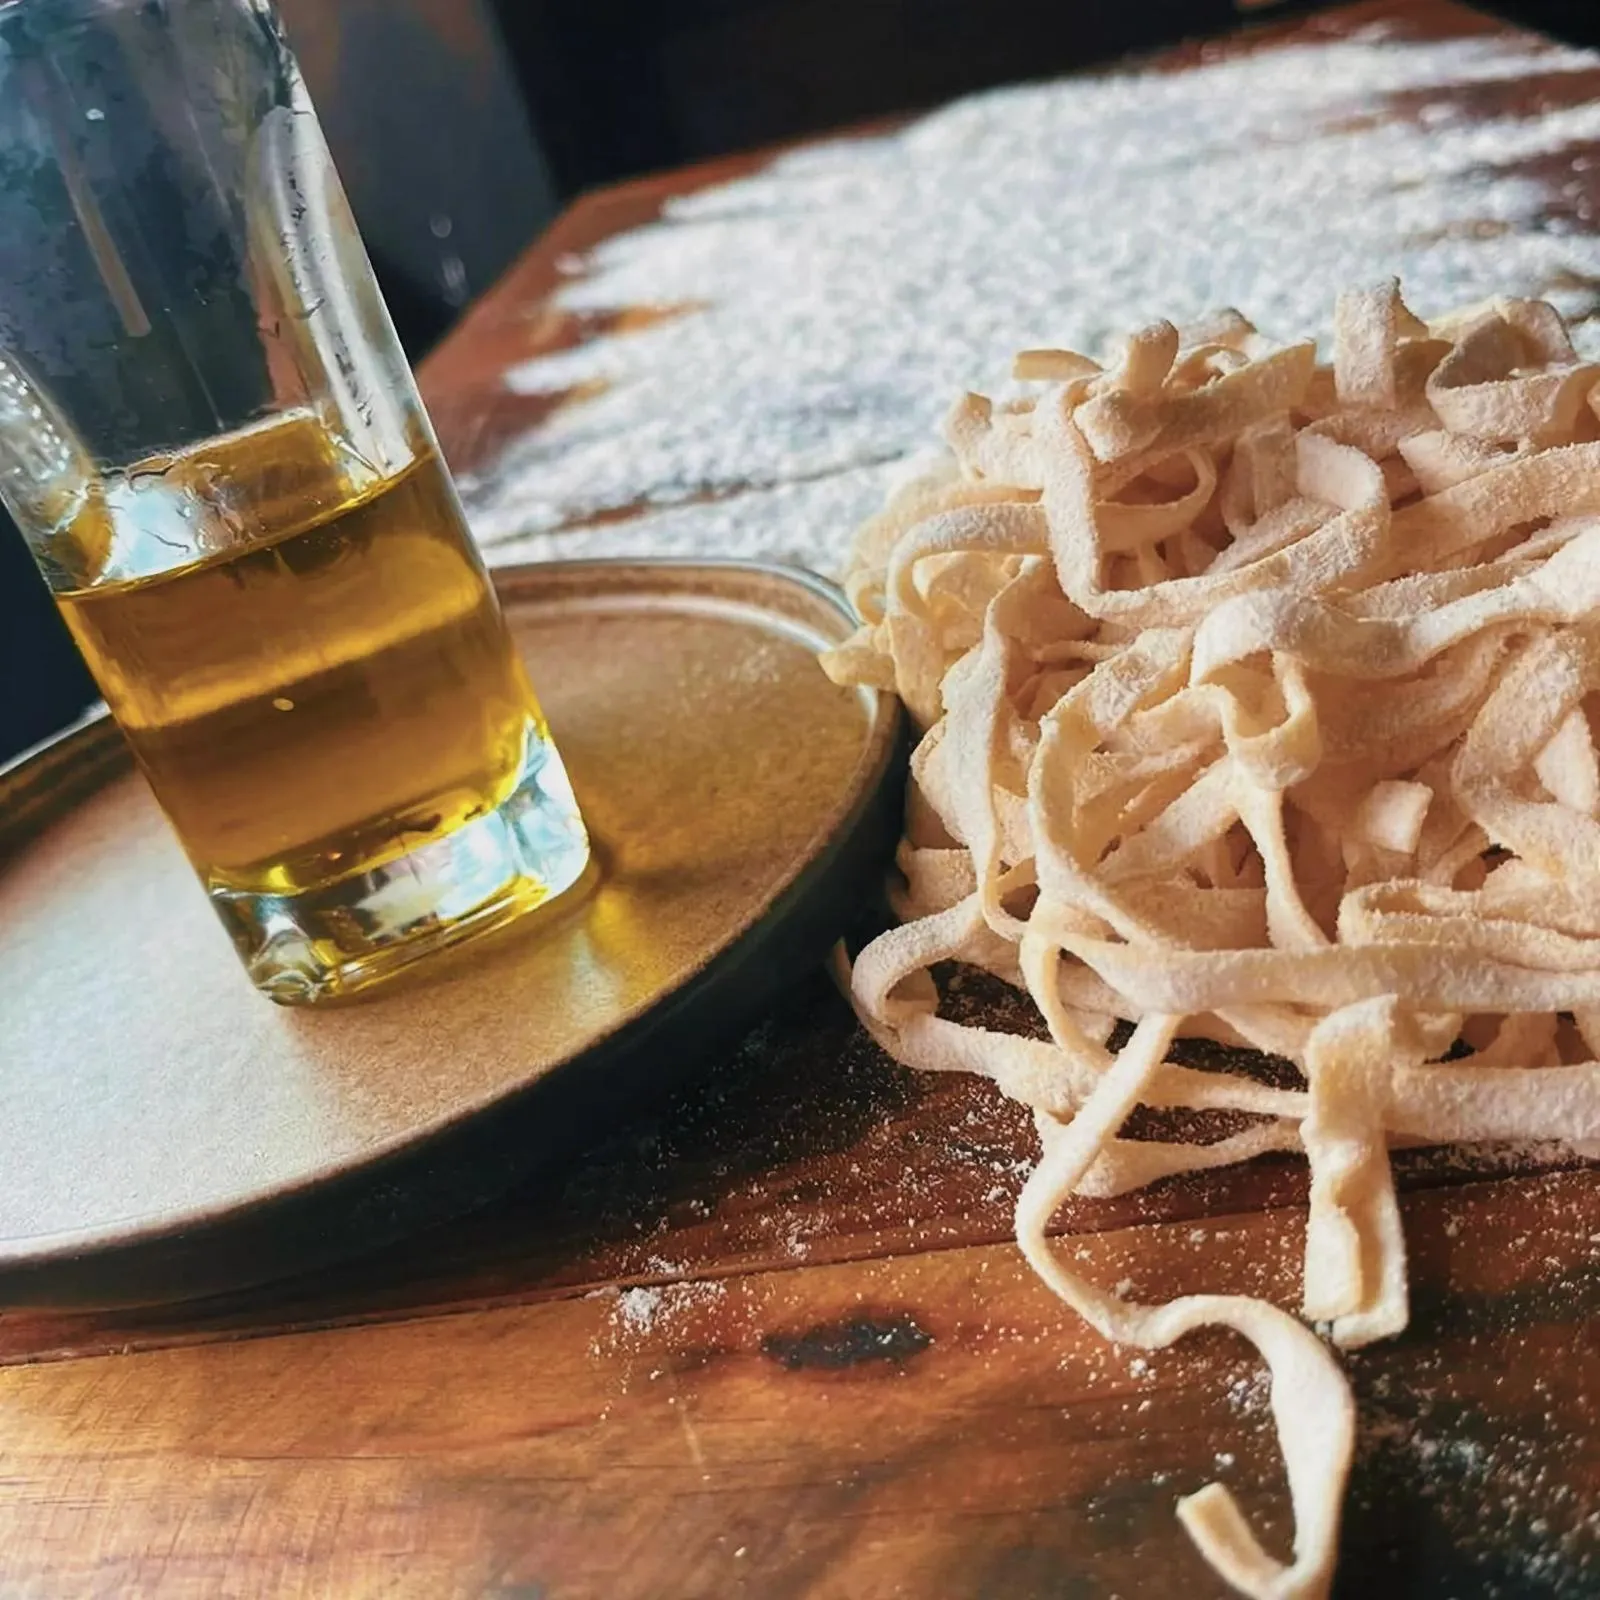 Tantalizing Tagliolini pasta and oil on a wooden table.